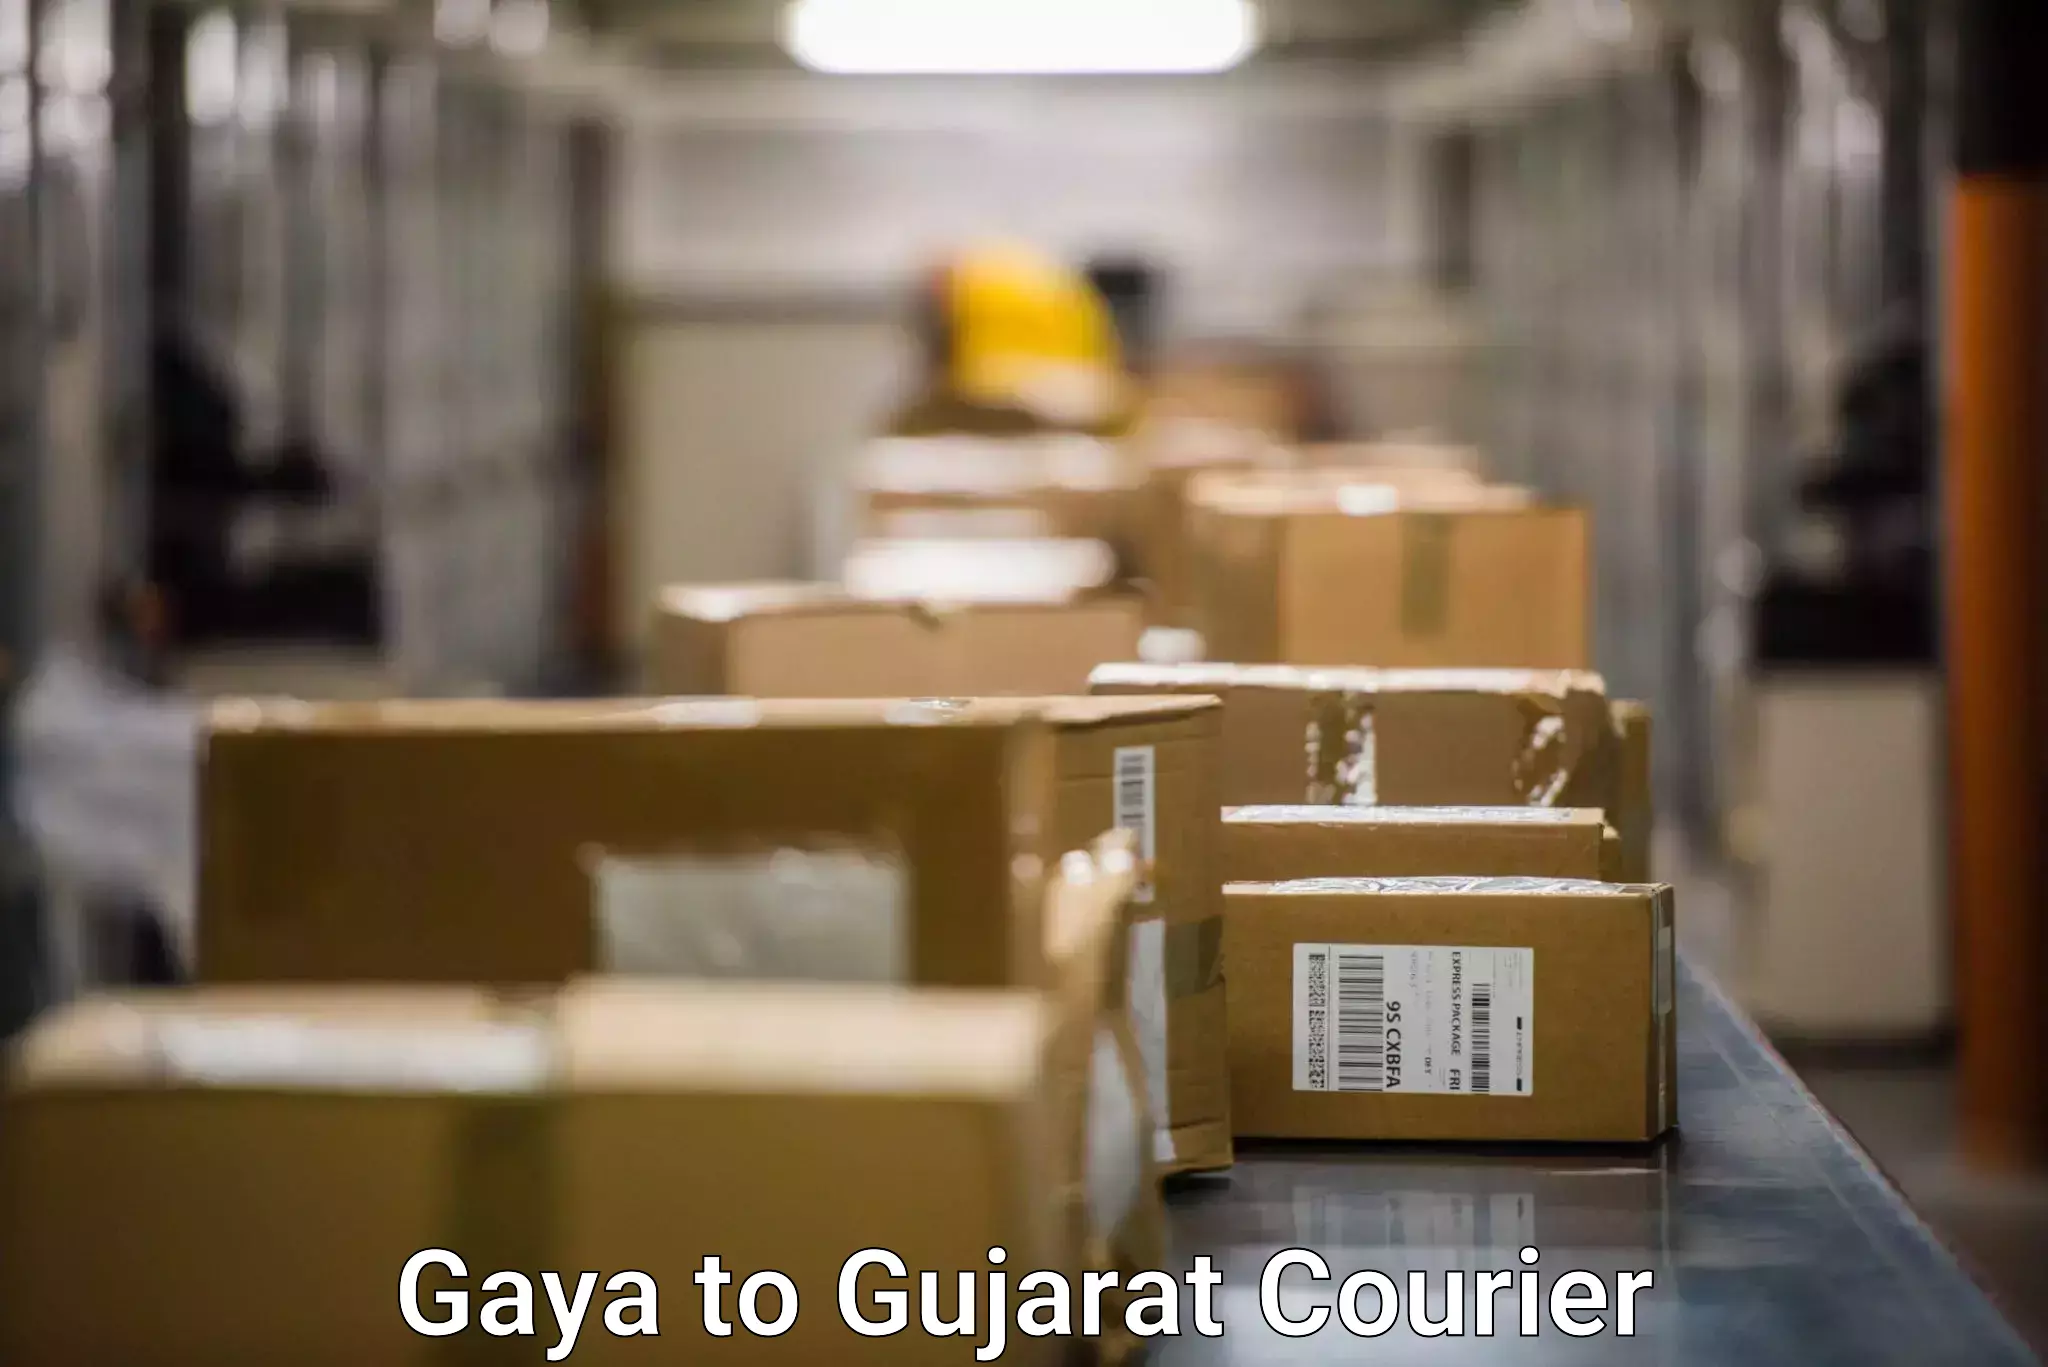 State-of-the-art courier technology Gaya to Dahegam